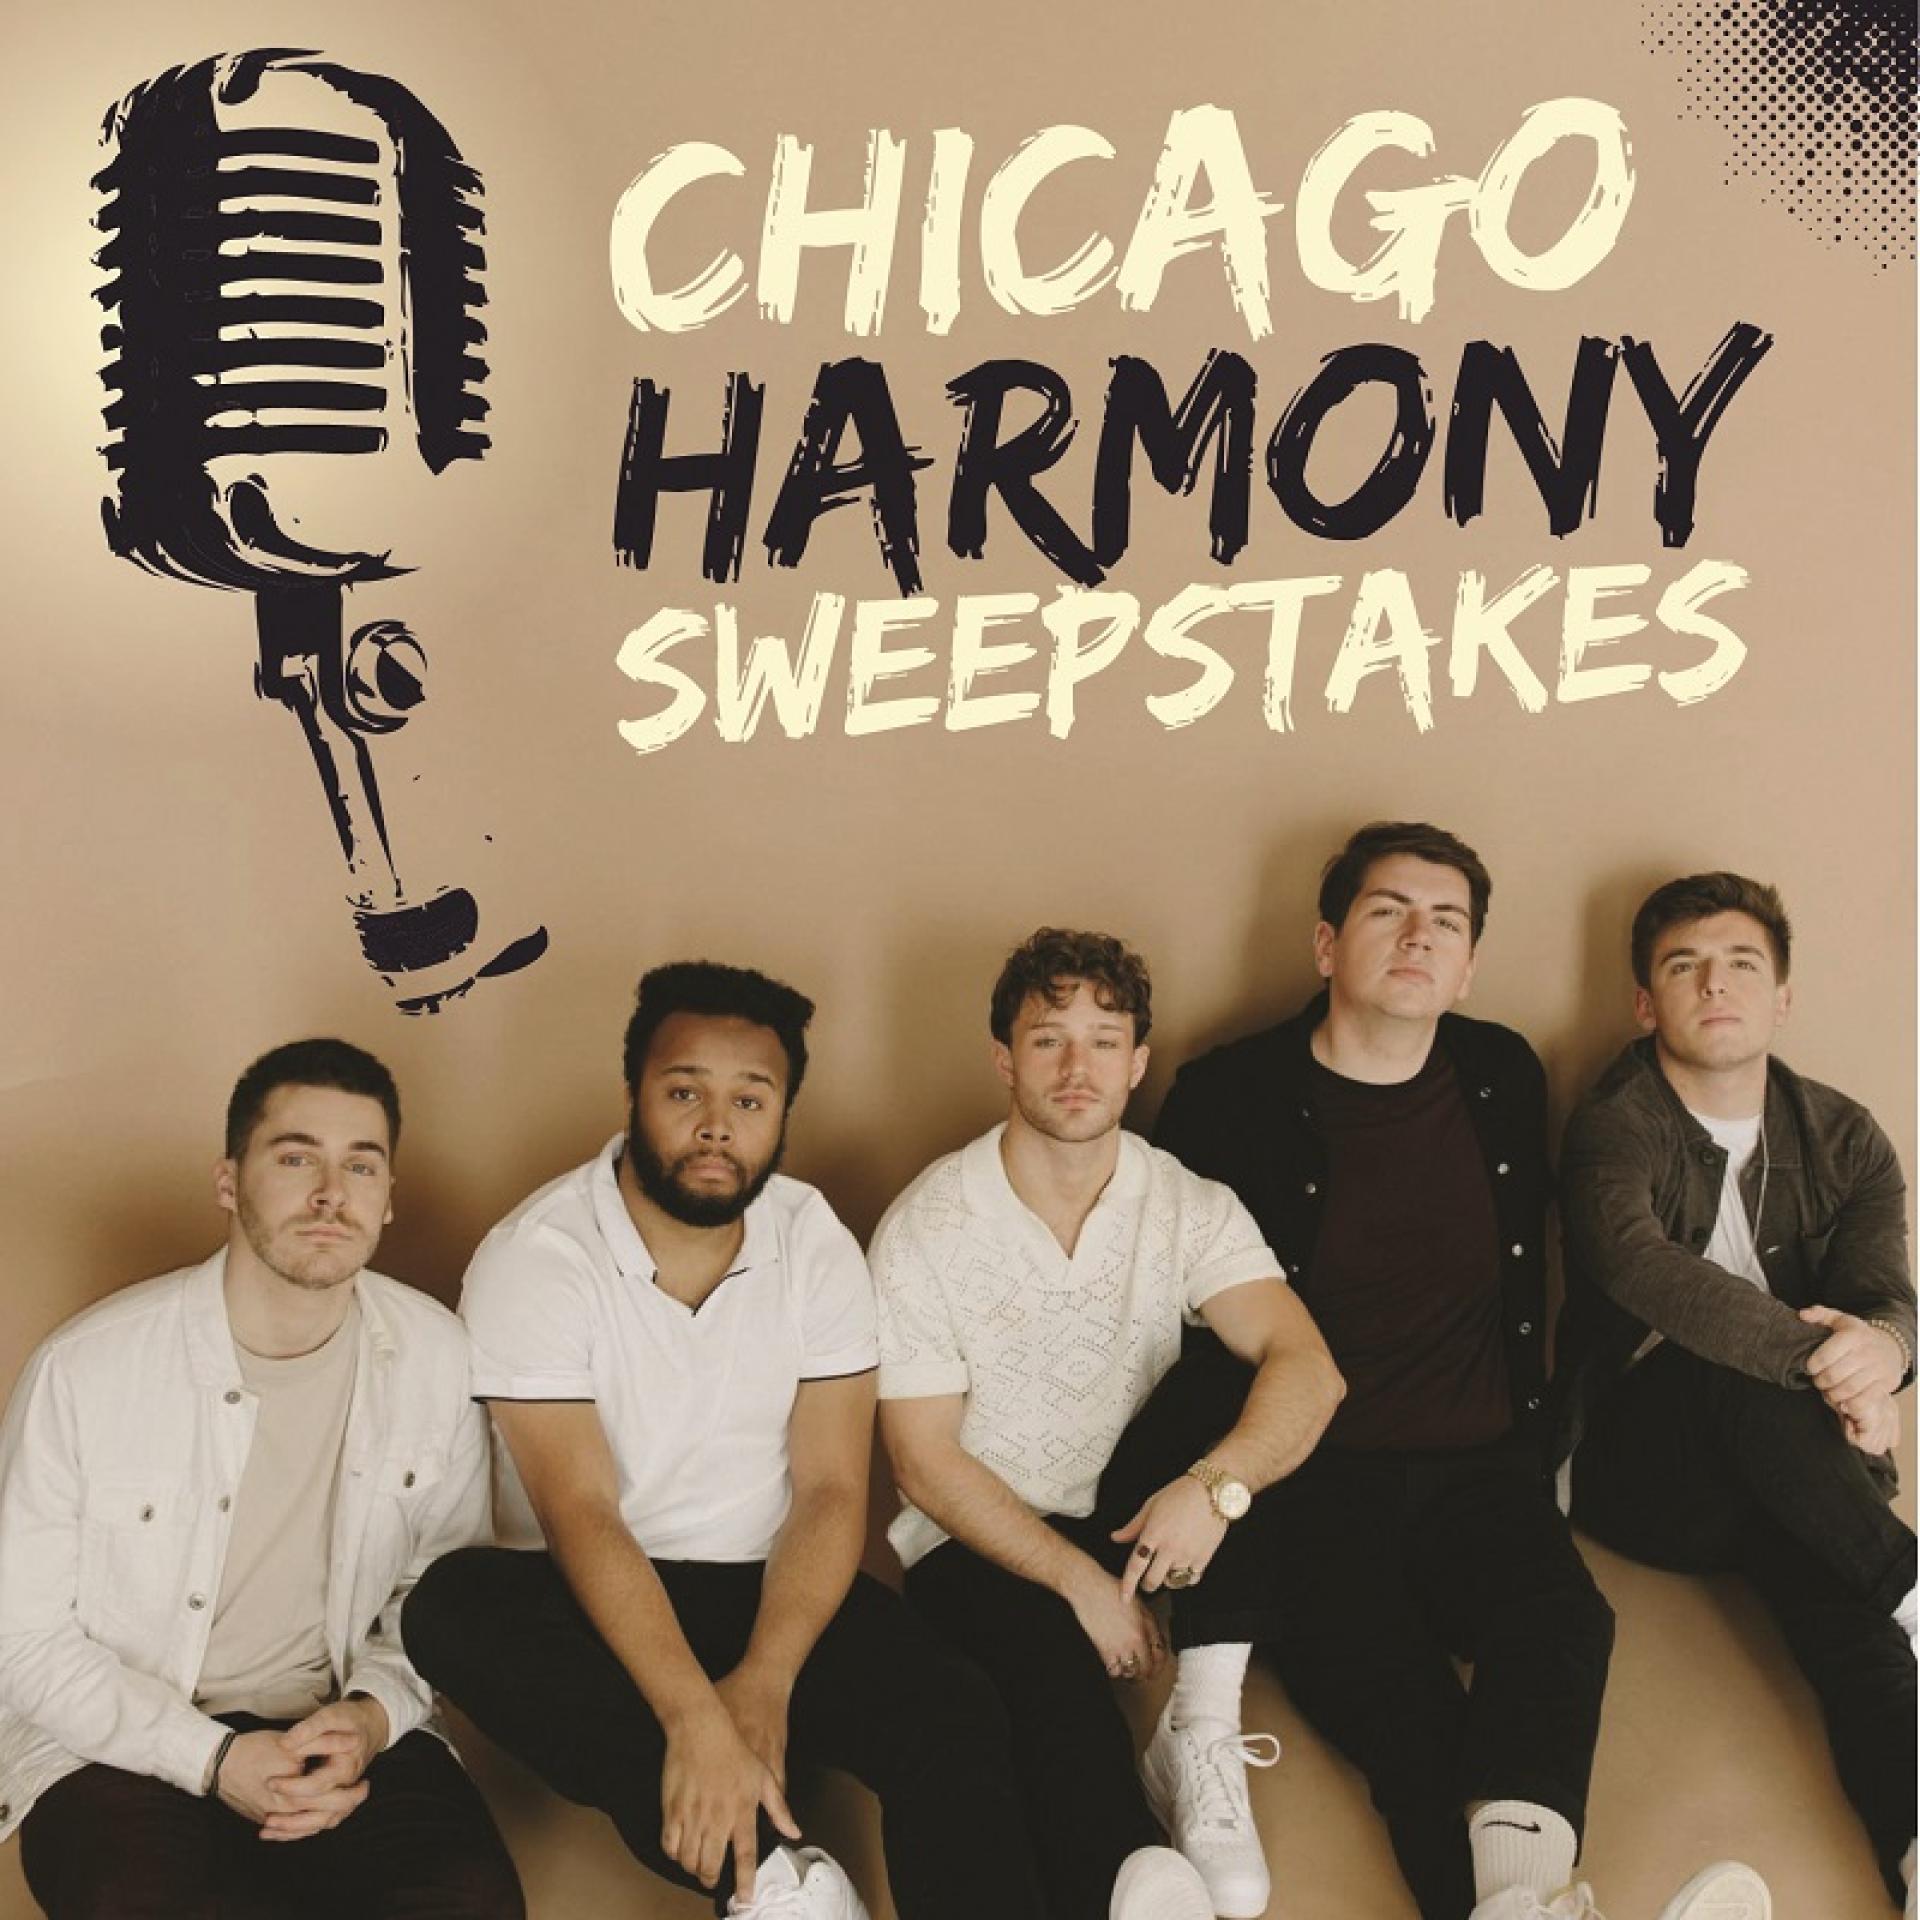 Performers in the Chicago Harmony Sweepstakes.